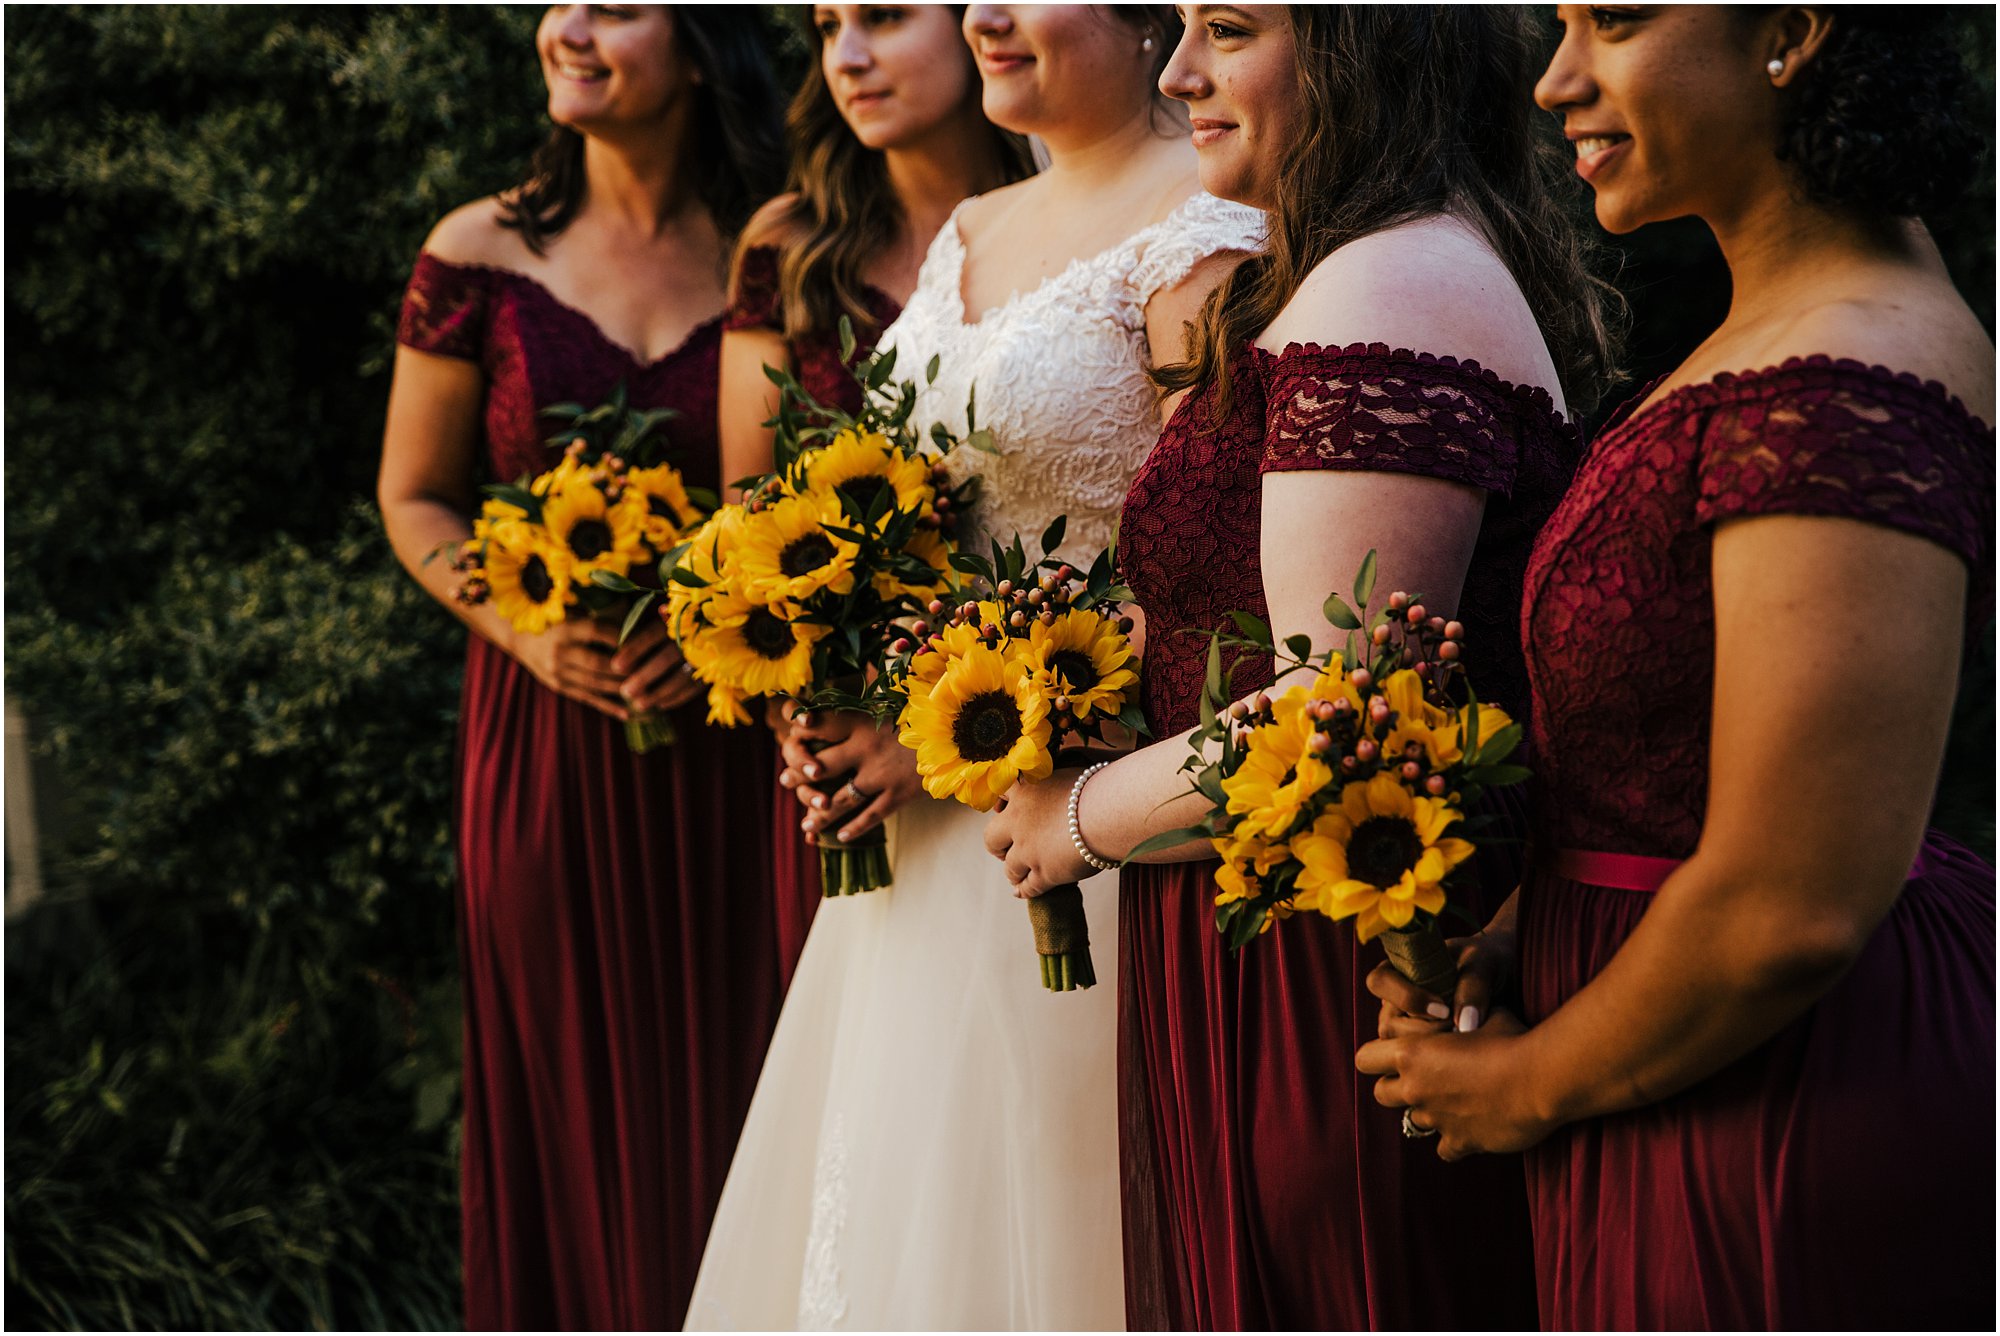 Sunflower bouquets held by bridesmaids in maroon dresses